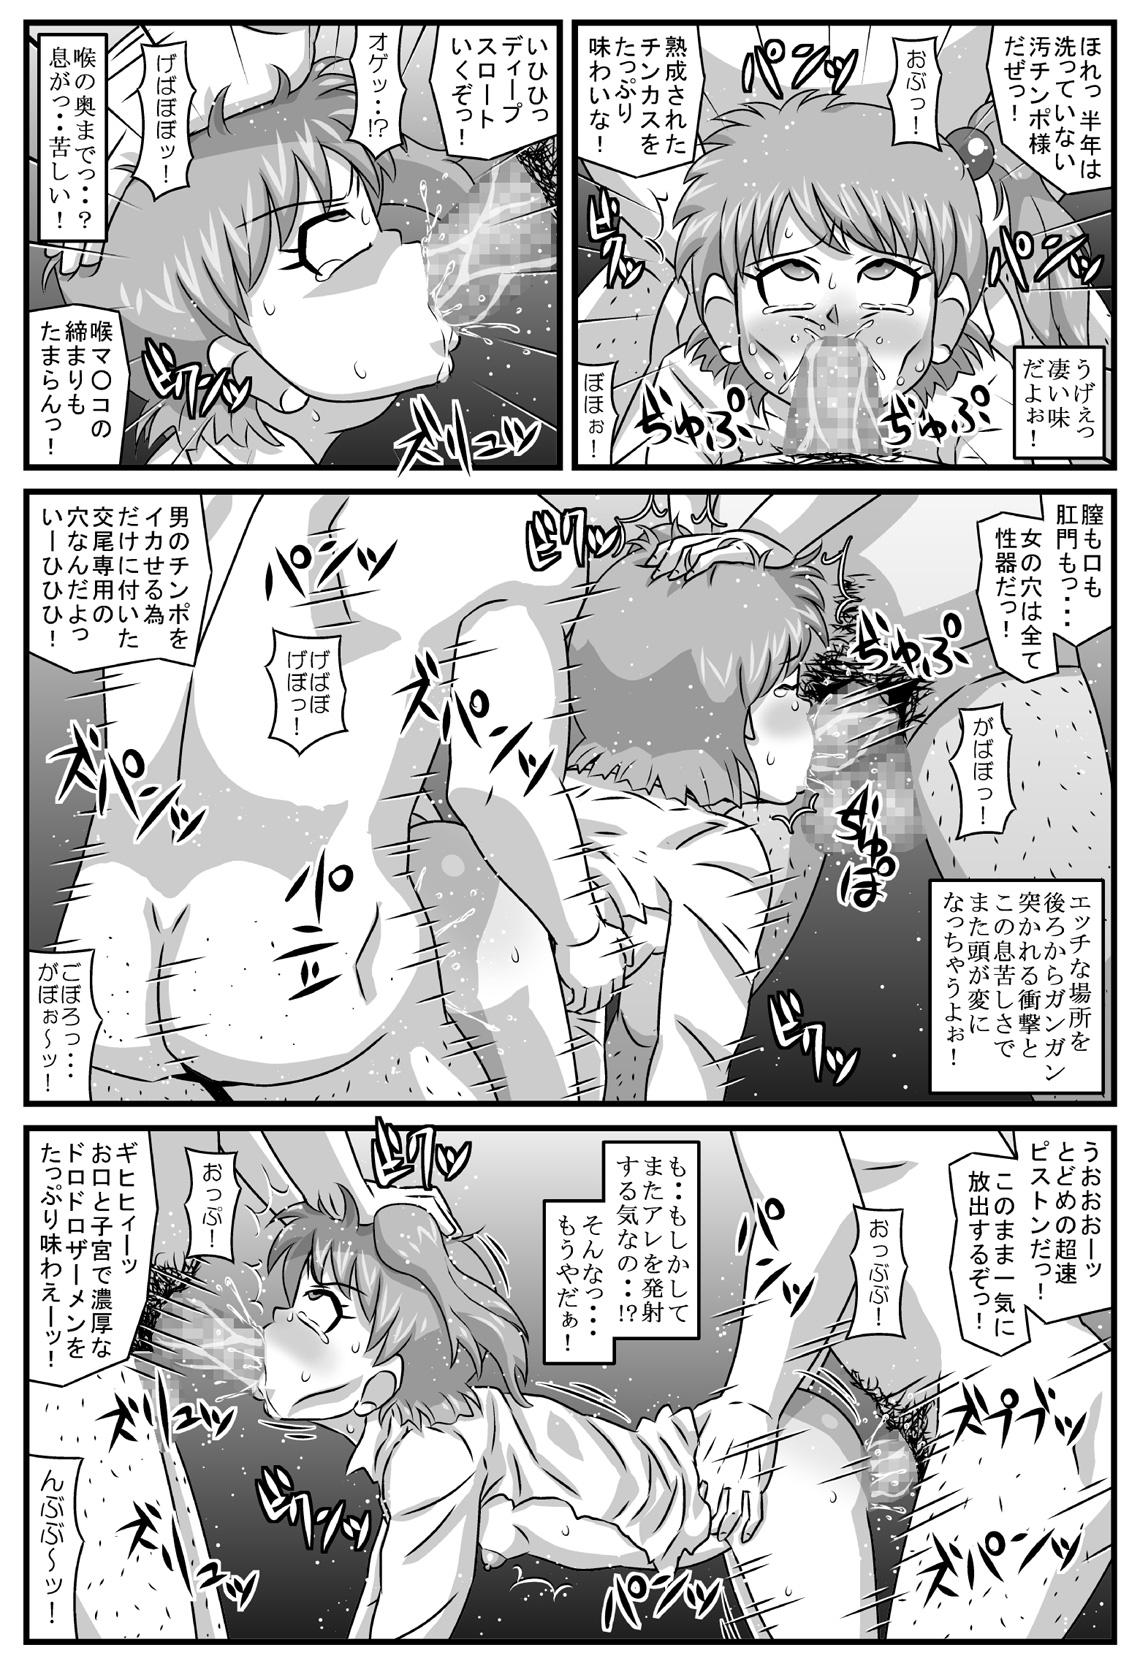 Peeing Maniac festival of the In Haru - Super robot wars Mask - Page 12